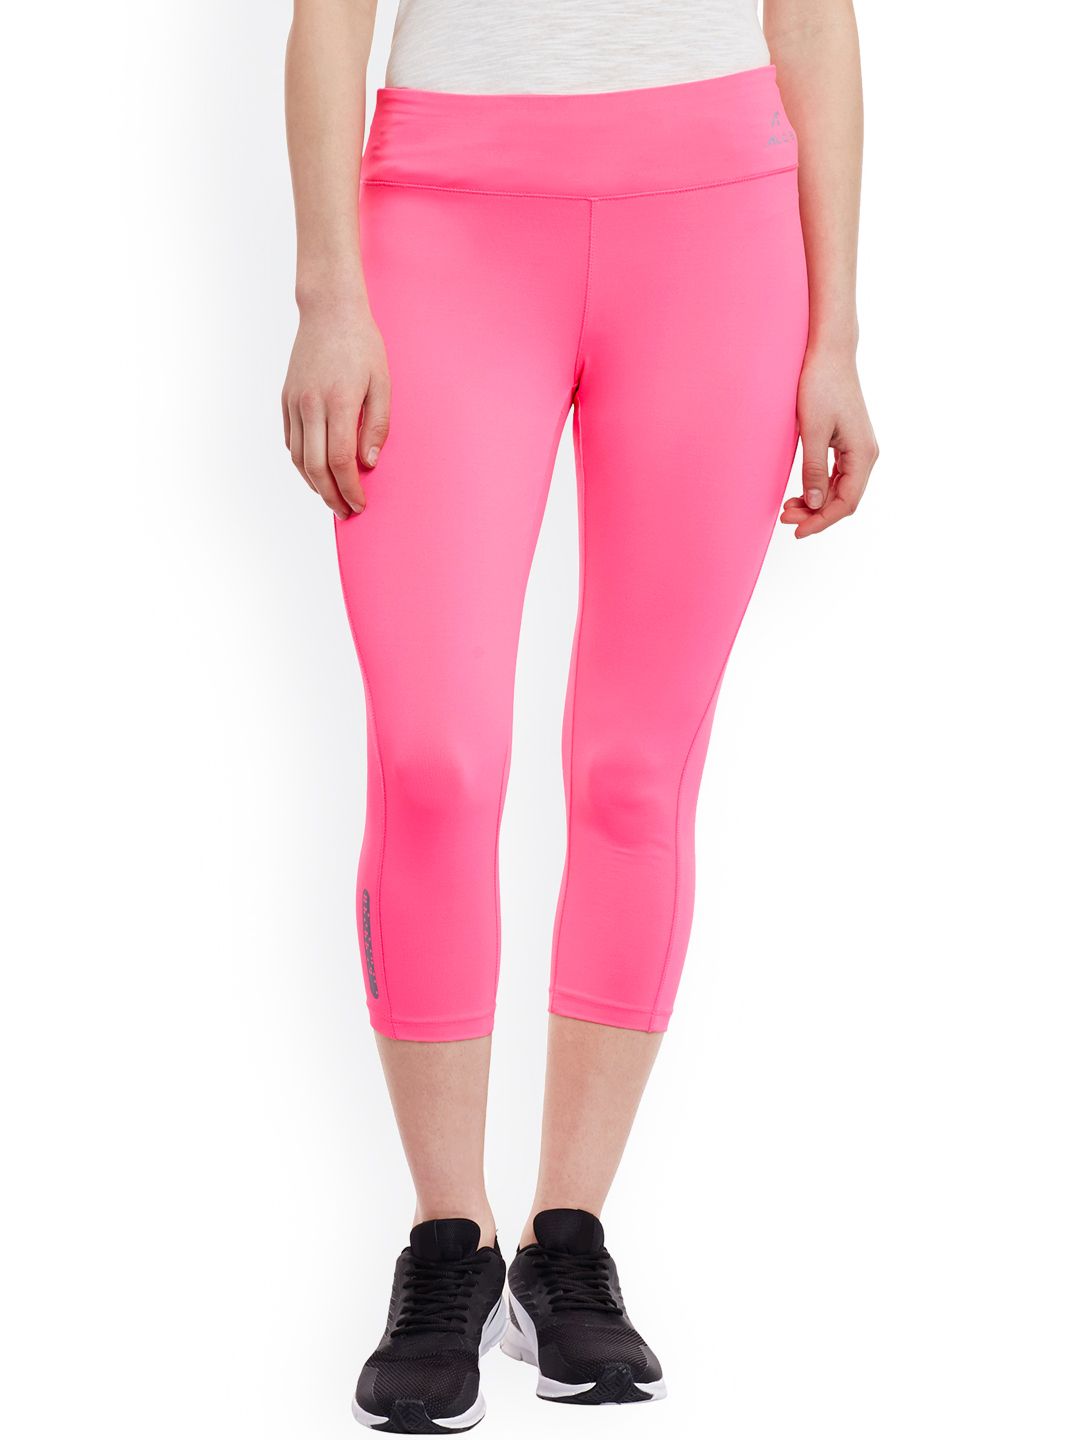 Alcis Pink Core Fit Tights Price in India